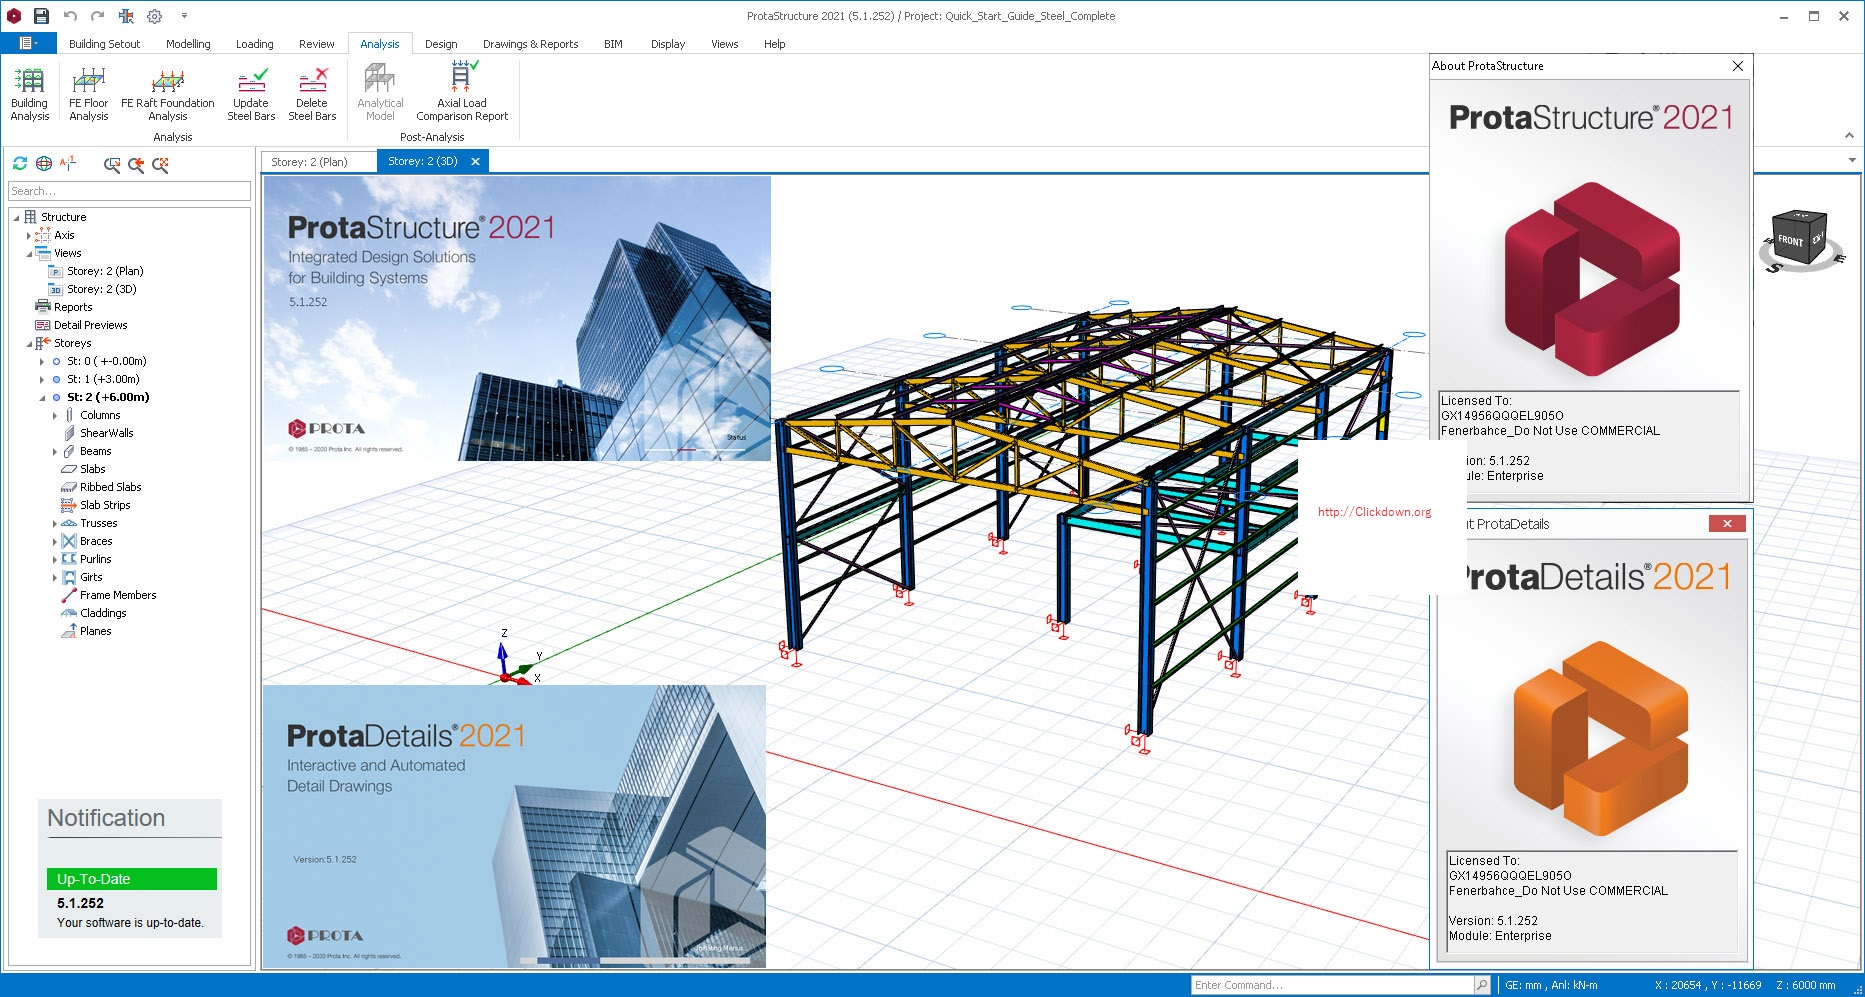 Working with ProtaStructure Suite Enterprise 2021